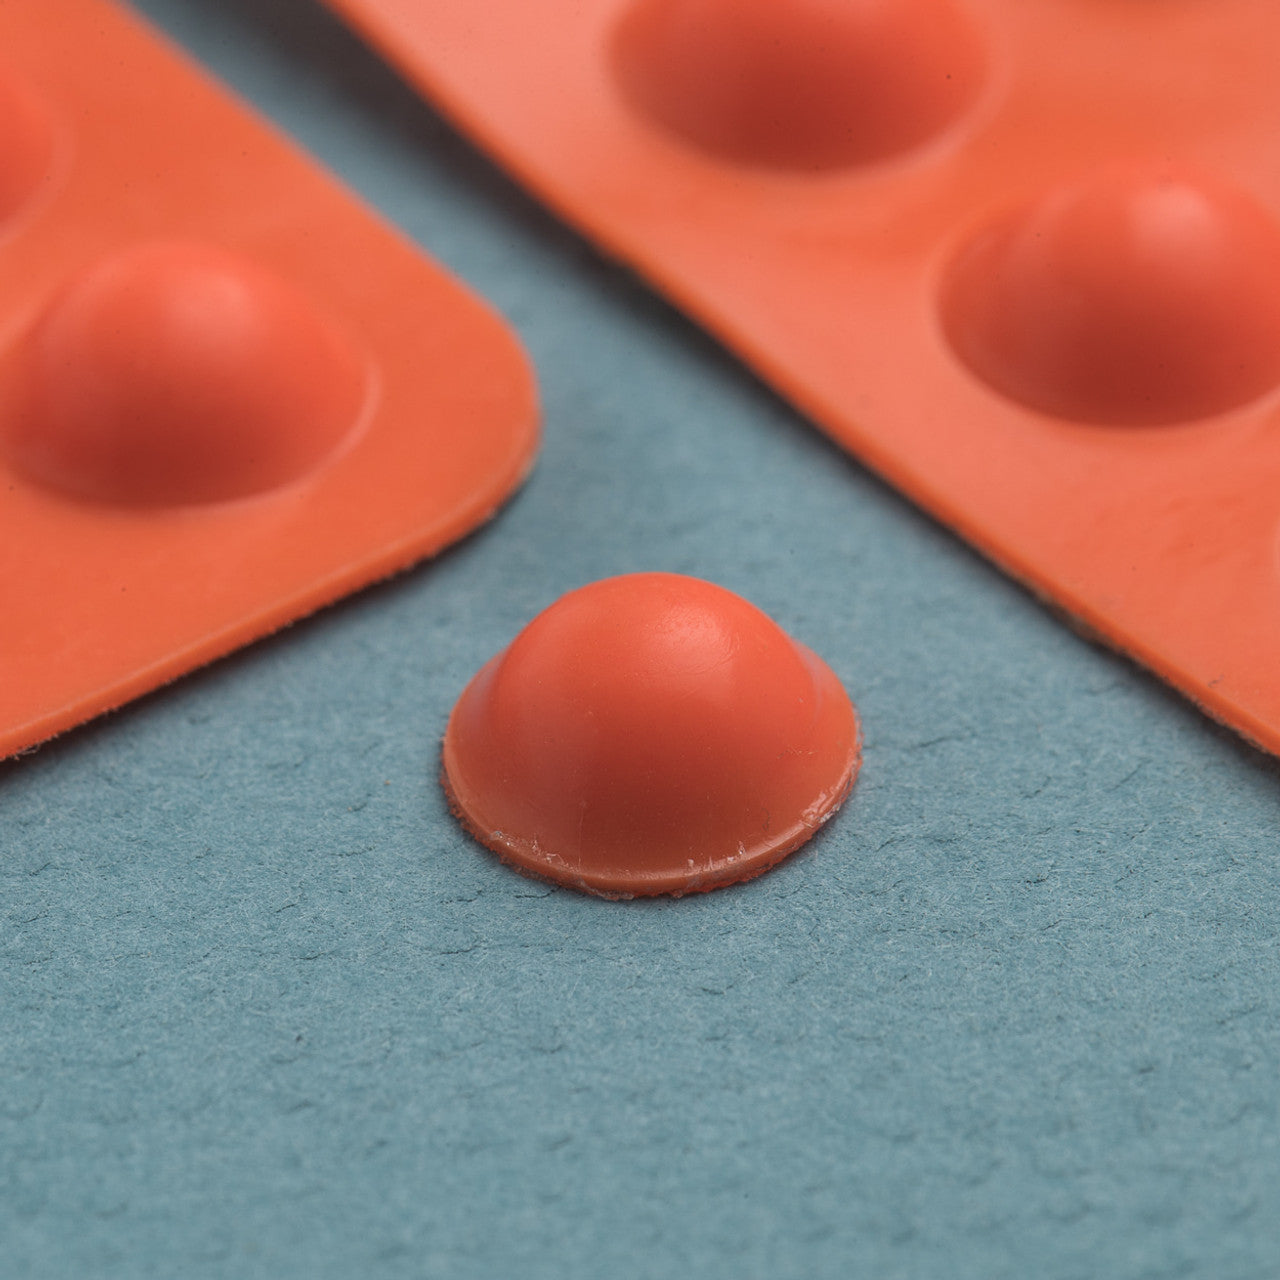 These low vision Can-Do Medium Orange Bump Dots are a great way to tactually mark appliances. Smooth, raised tactile with adhesive back.